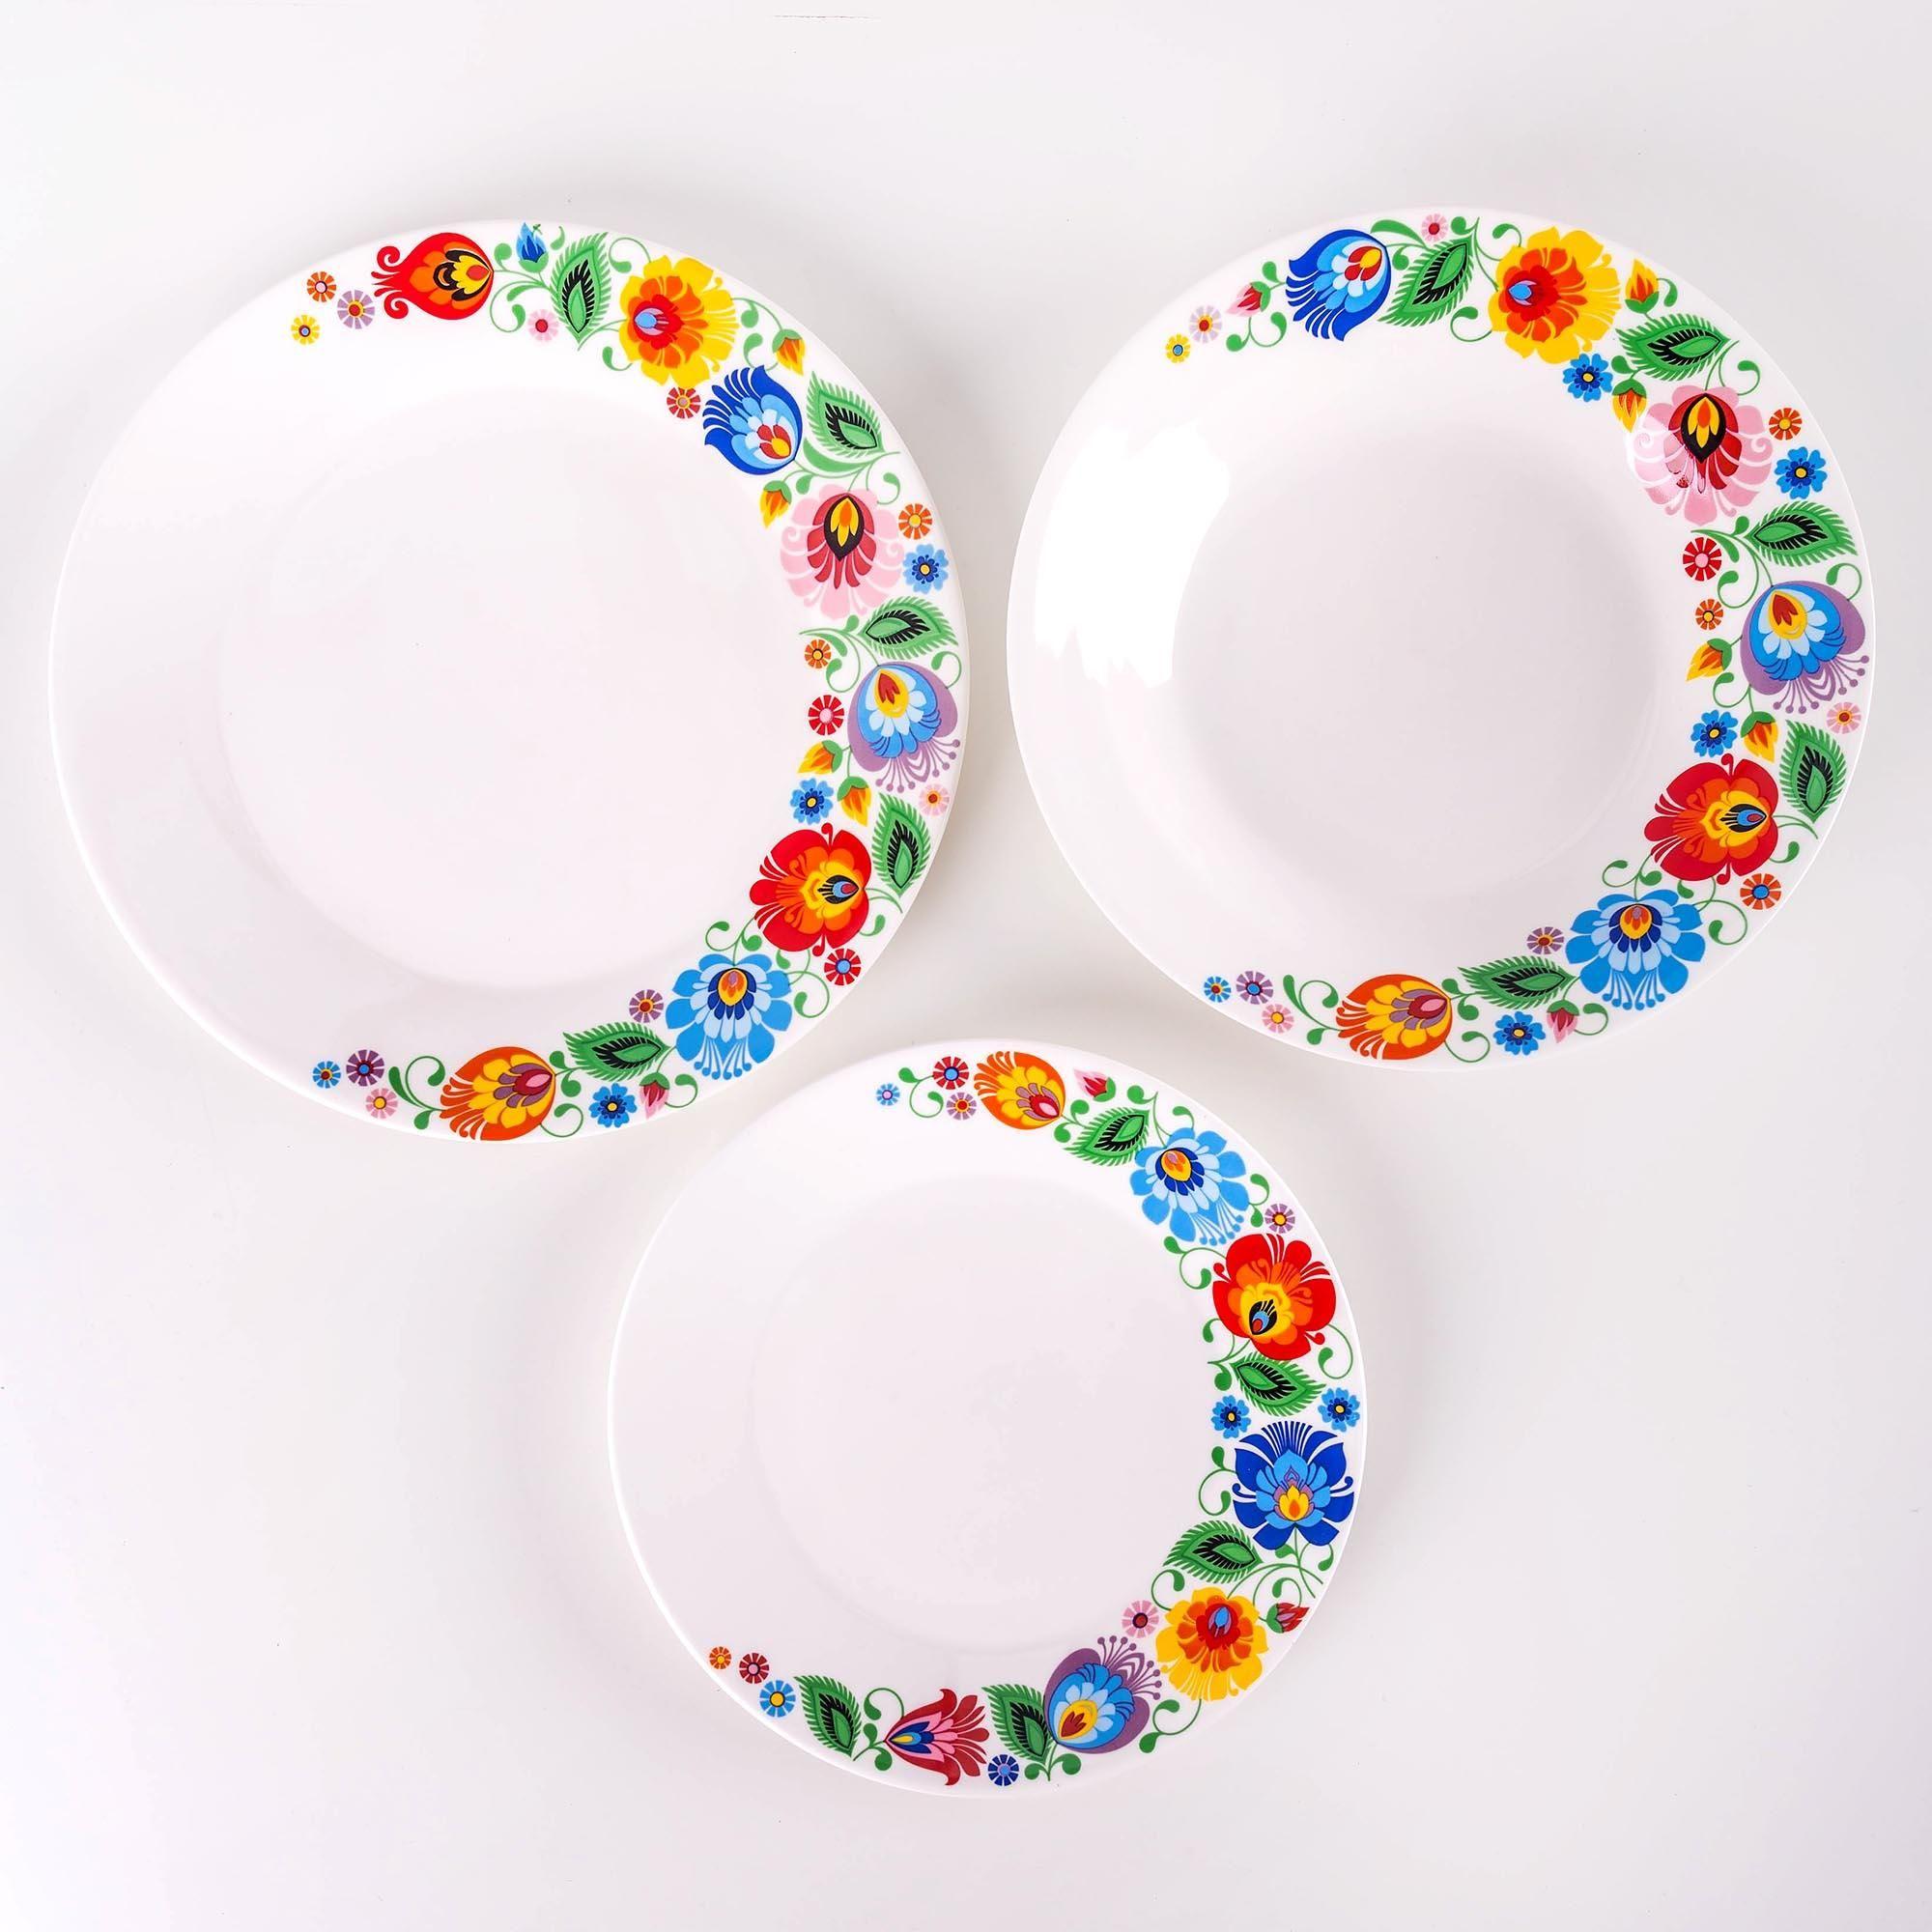 FOLKSTAR plates from Łowicz dinner set 18 pcs